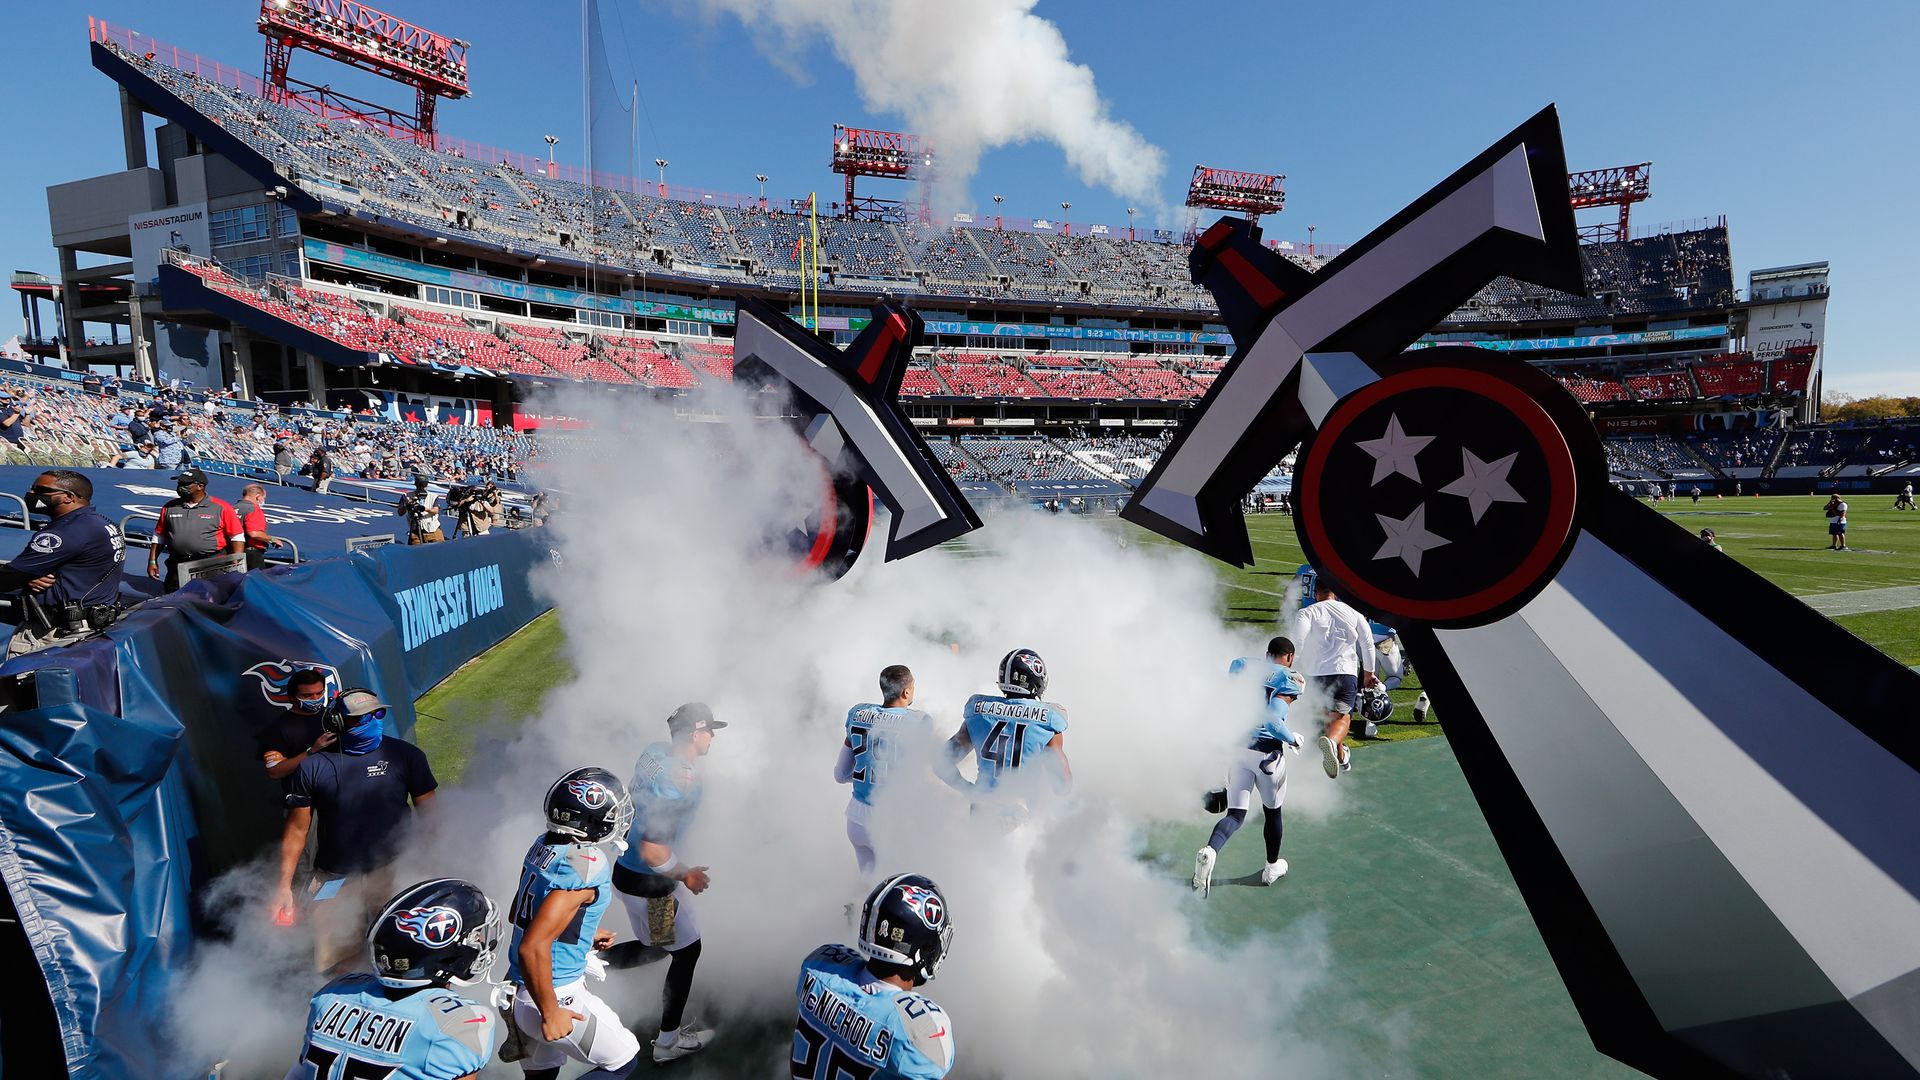 The Tennessee Titans take the filed for their game against the Chicago Bears at Nissan Stadium on November 08, 2020